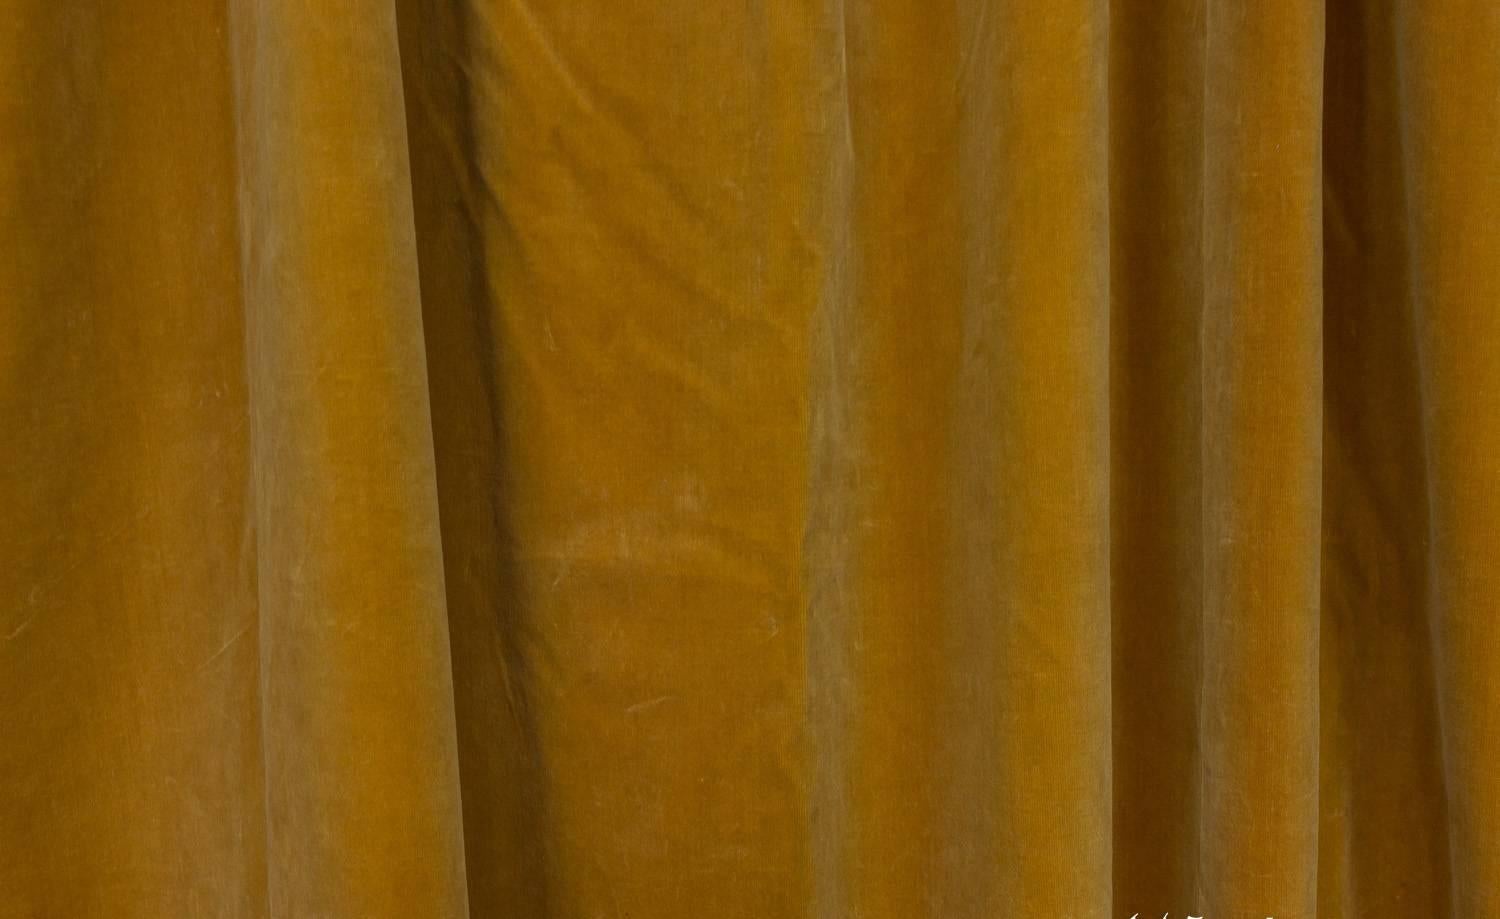 Pair of French gold velvet drapes with ivory cotton lining. Each panel is 56 inches wide at the top for a total of 112 inches.